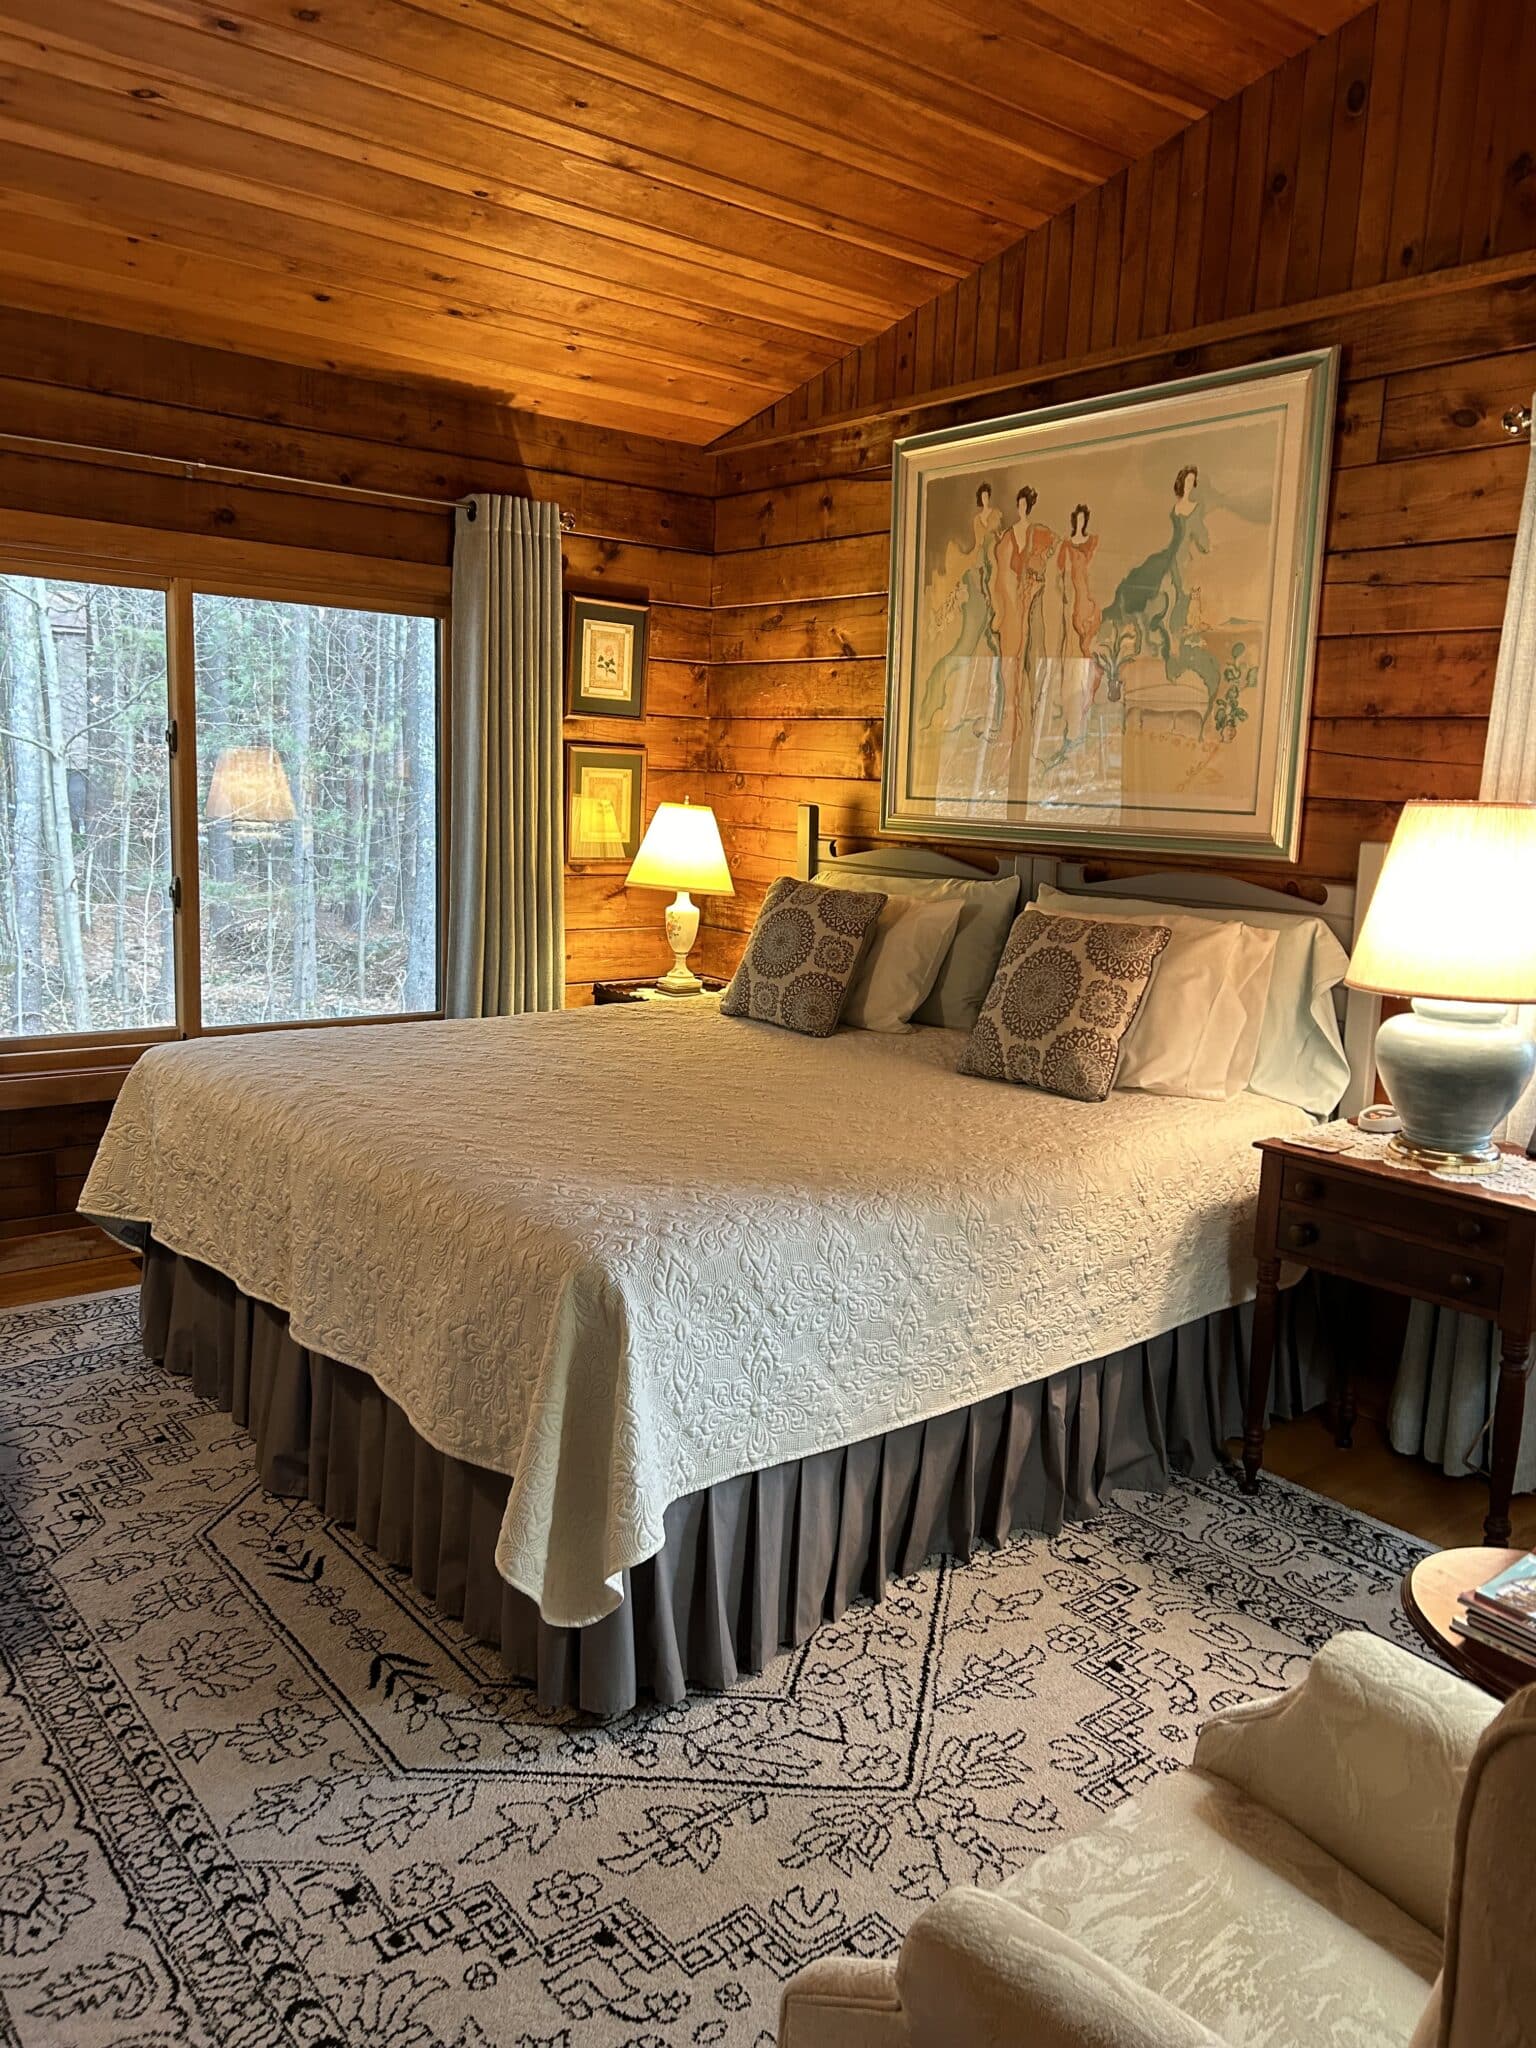 The Greylock Room with king size bed, nightstands with lamps, big window view of forest, large artwork above the bed, and area rug over hardwood oak floor.